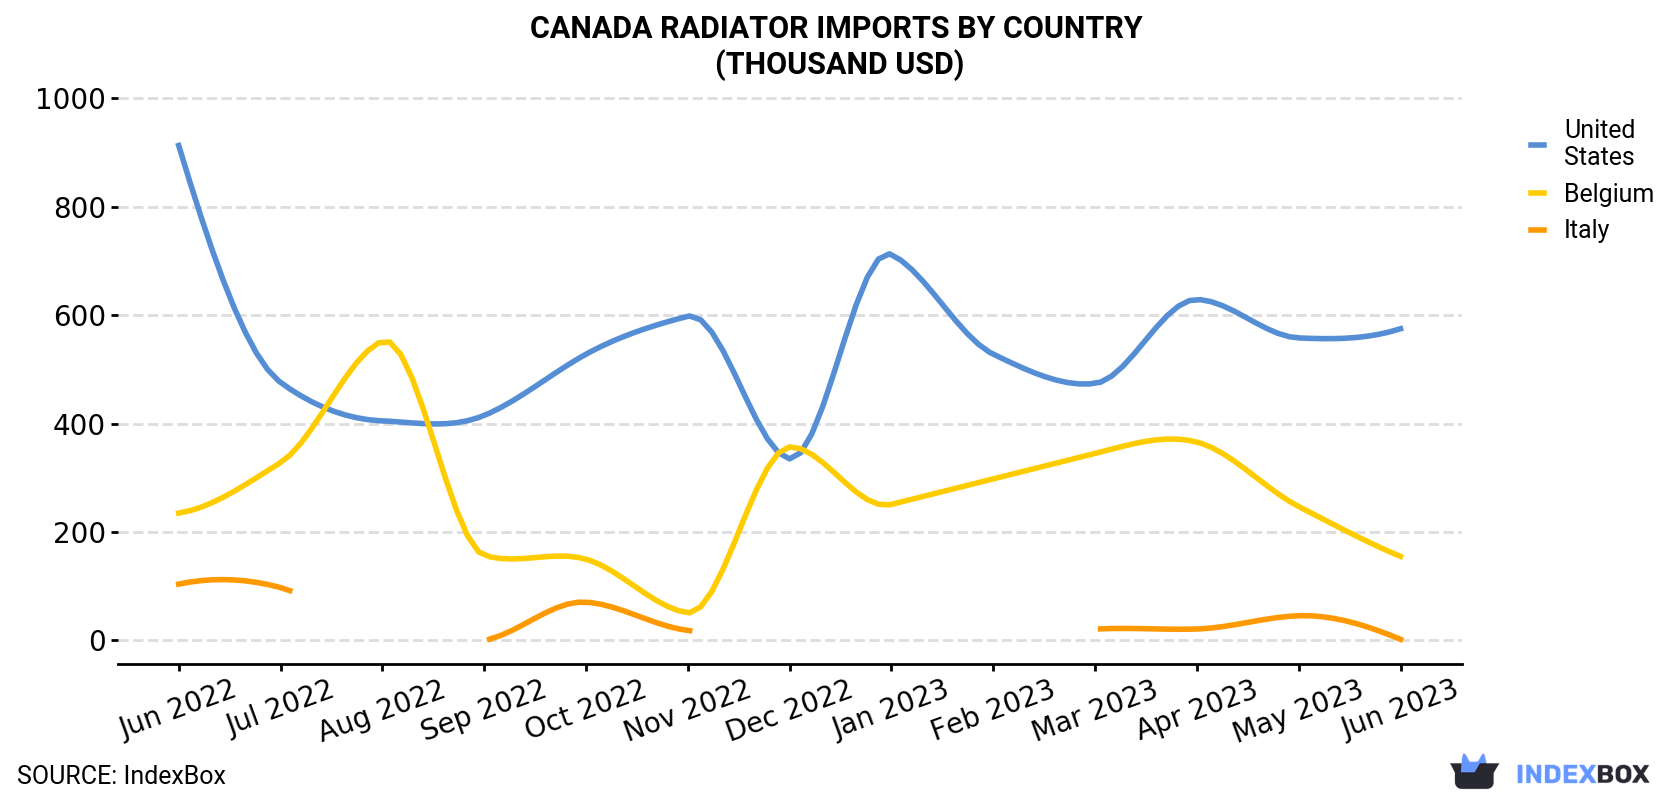 Canada Radiator Imports By Country (Thousand USD)